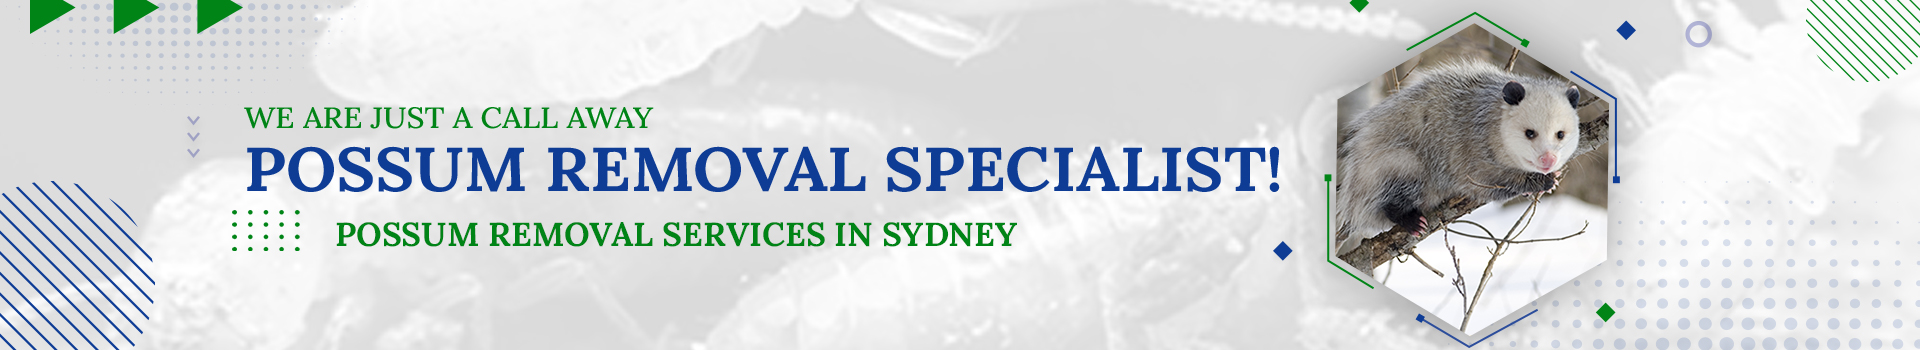 Possum Removal services in Sydney